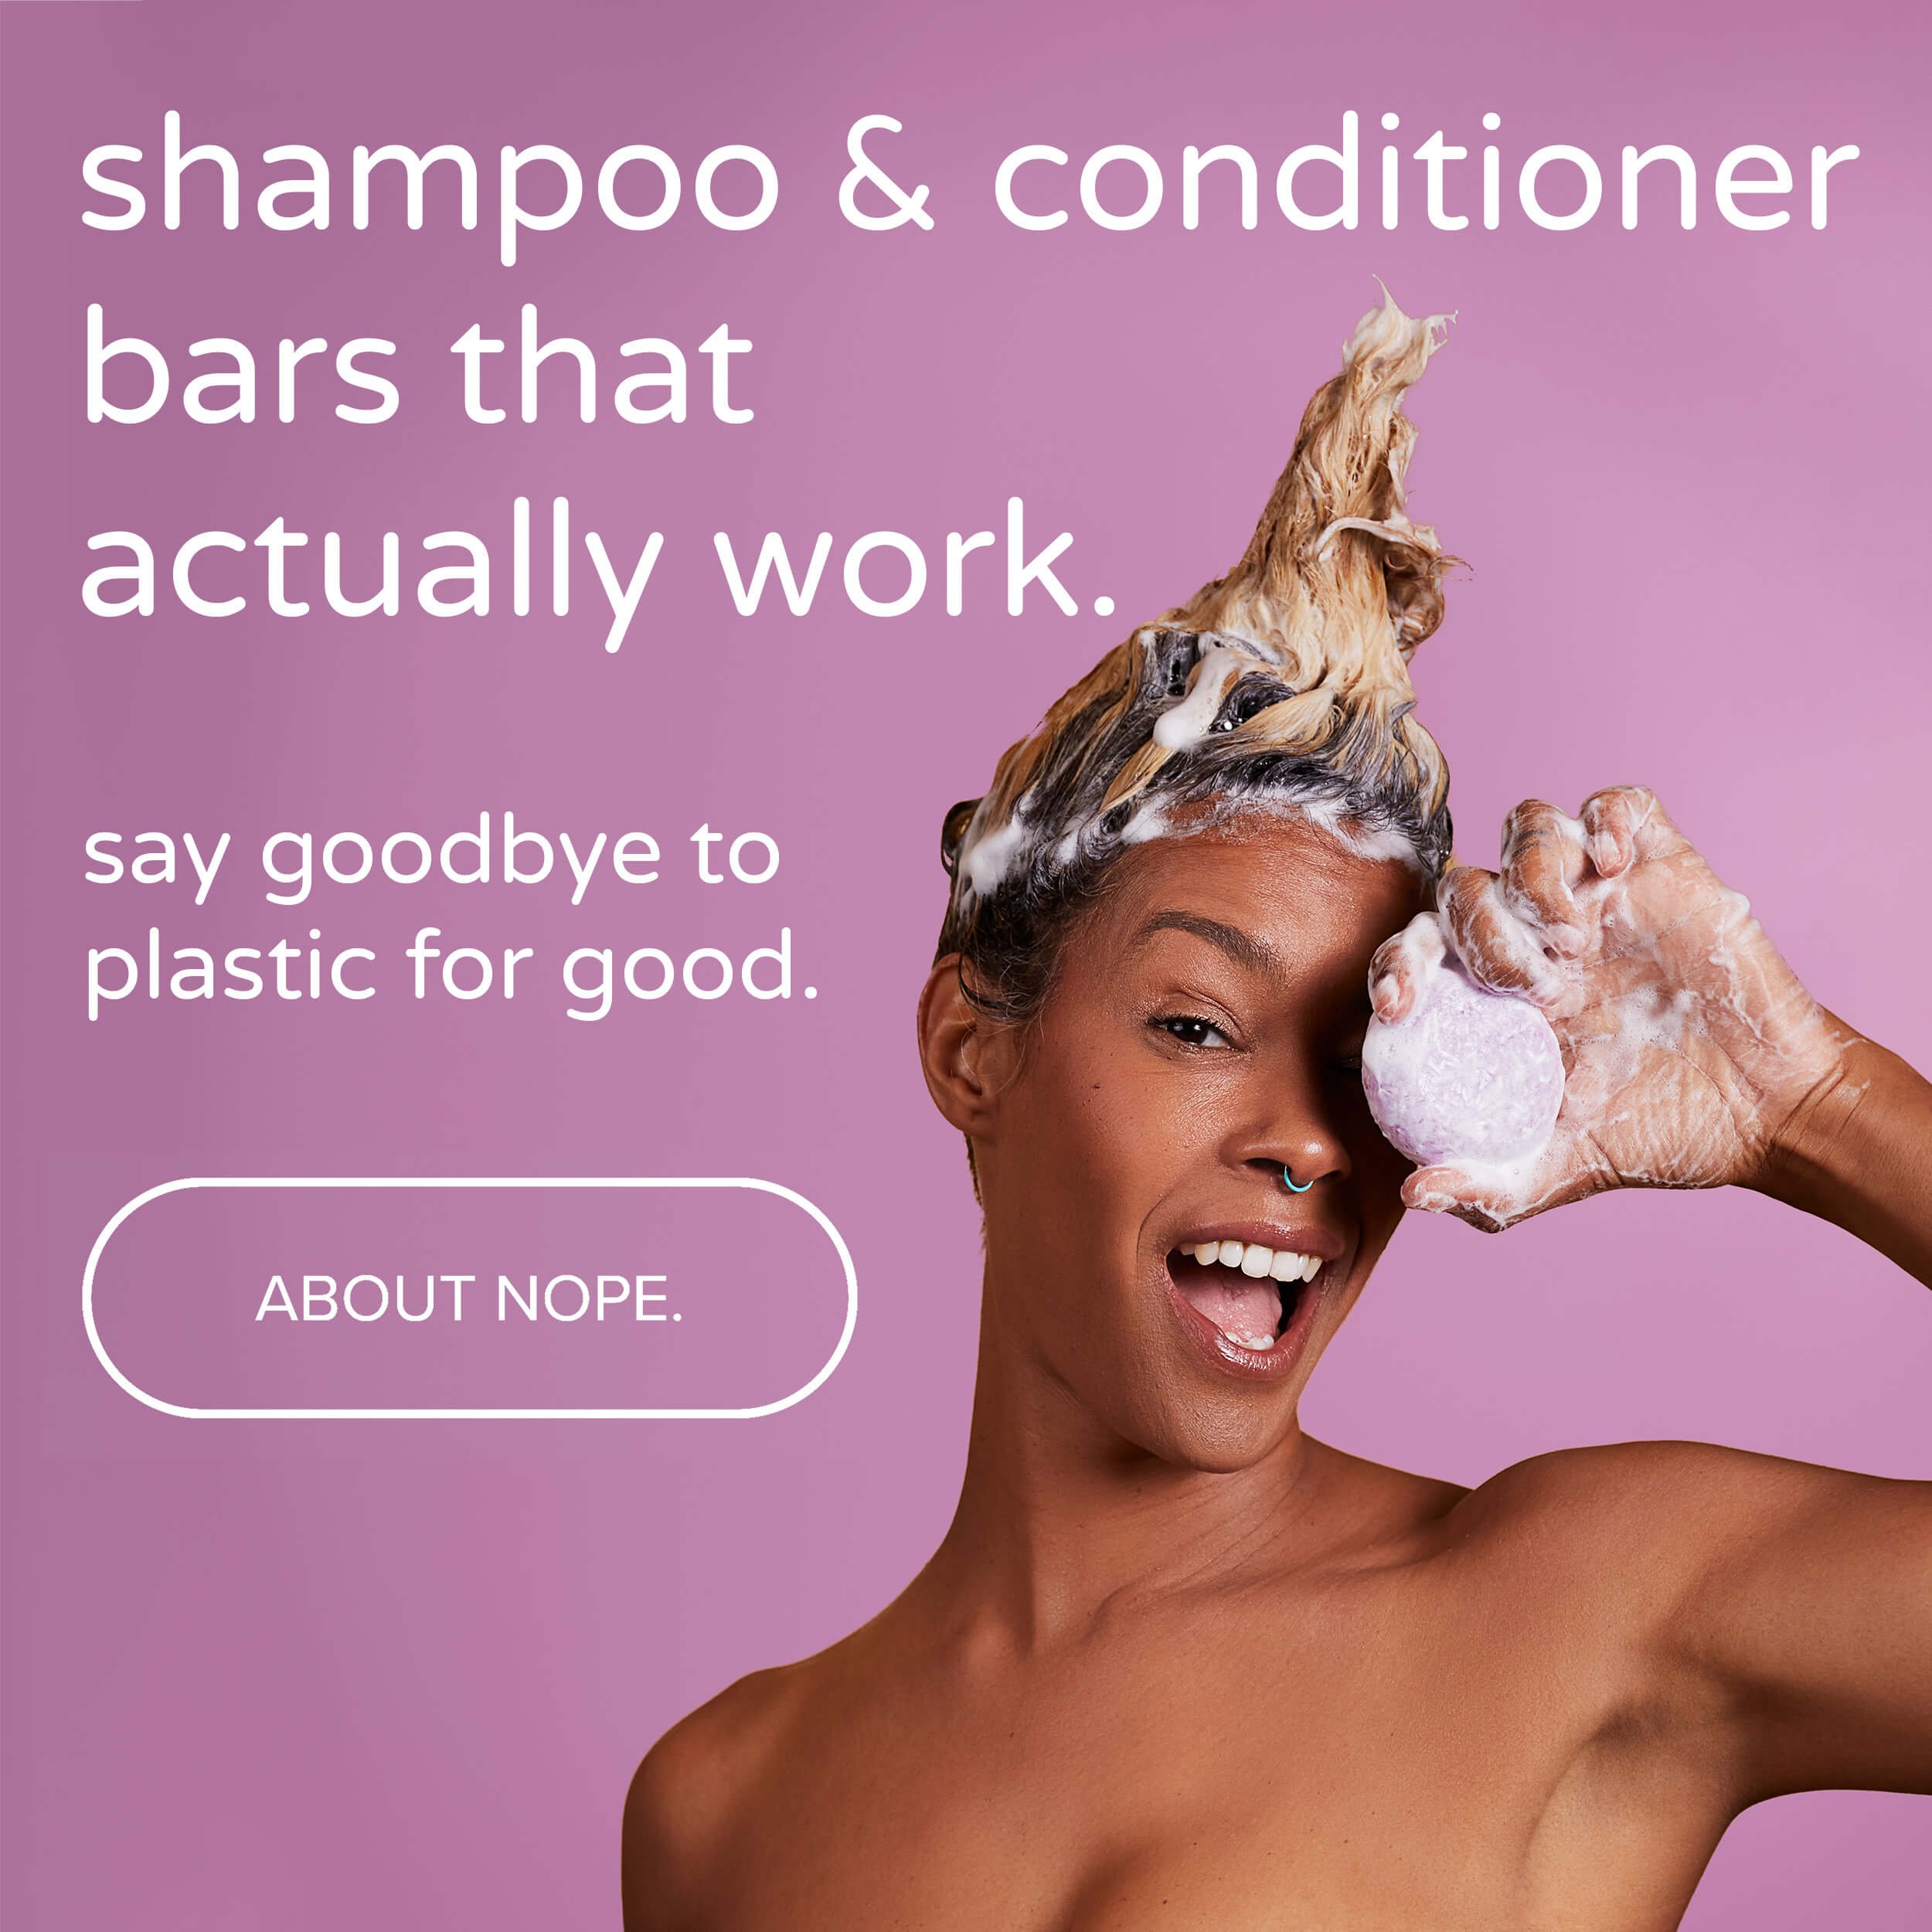 shampoo & conditioner bars that actually work _ say goodbye to plastic for good.jpg